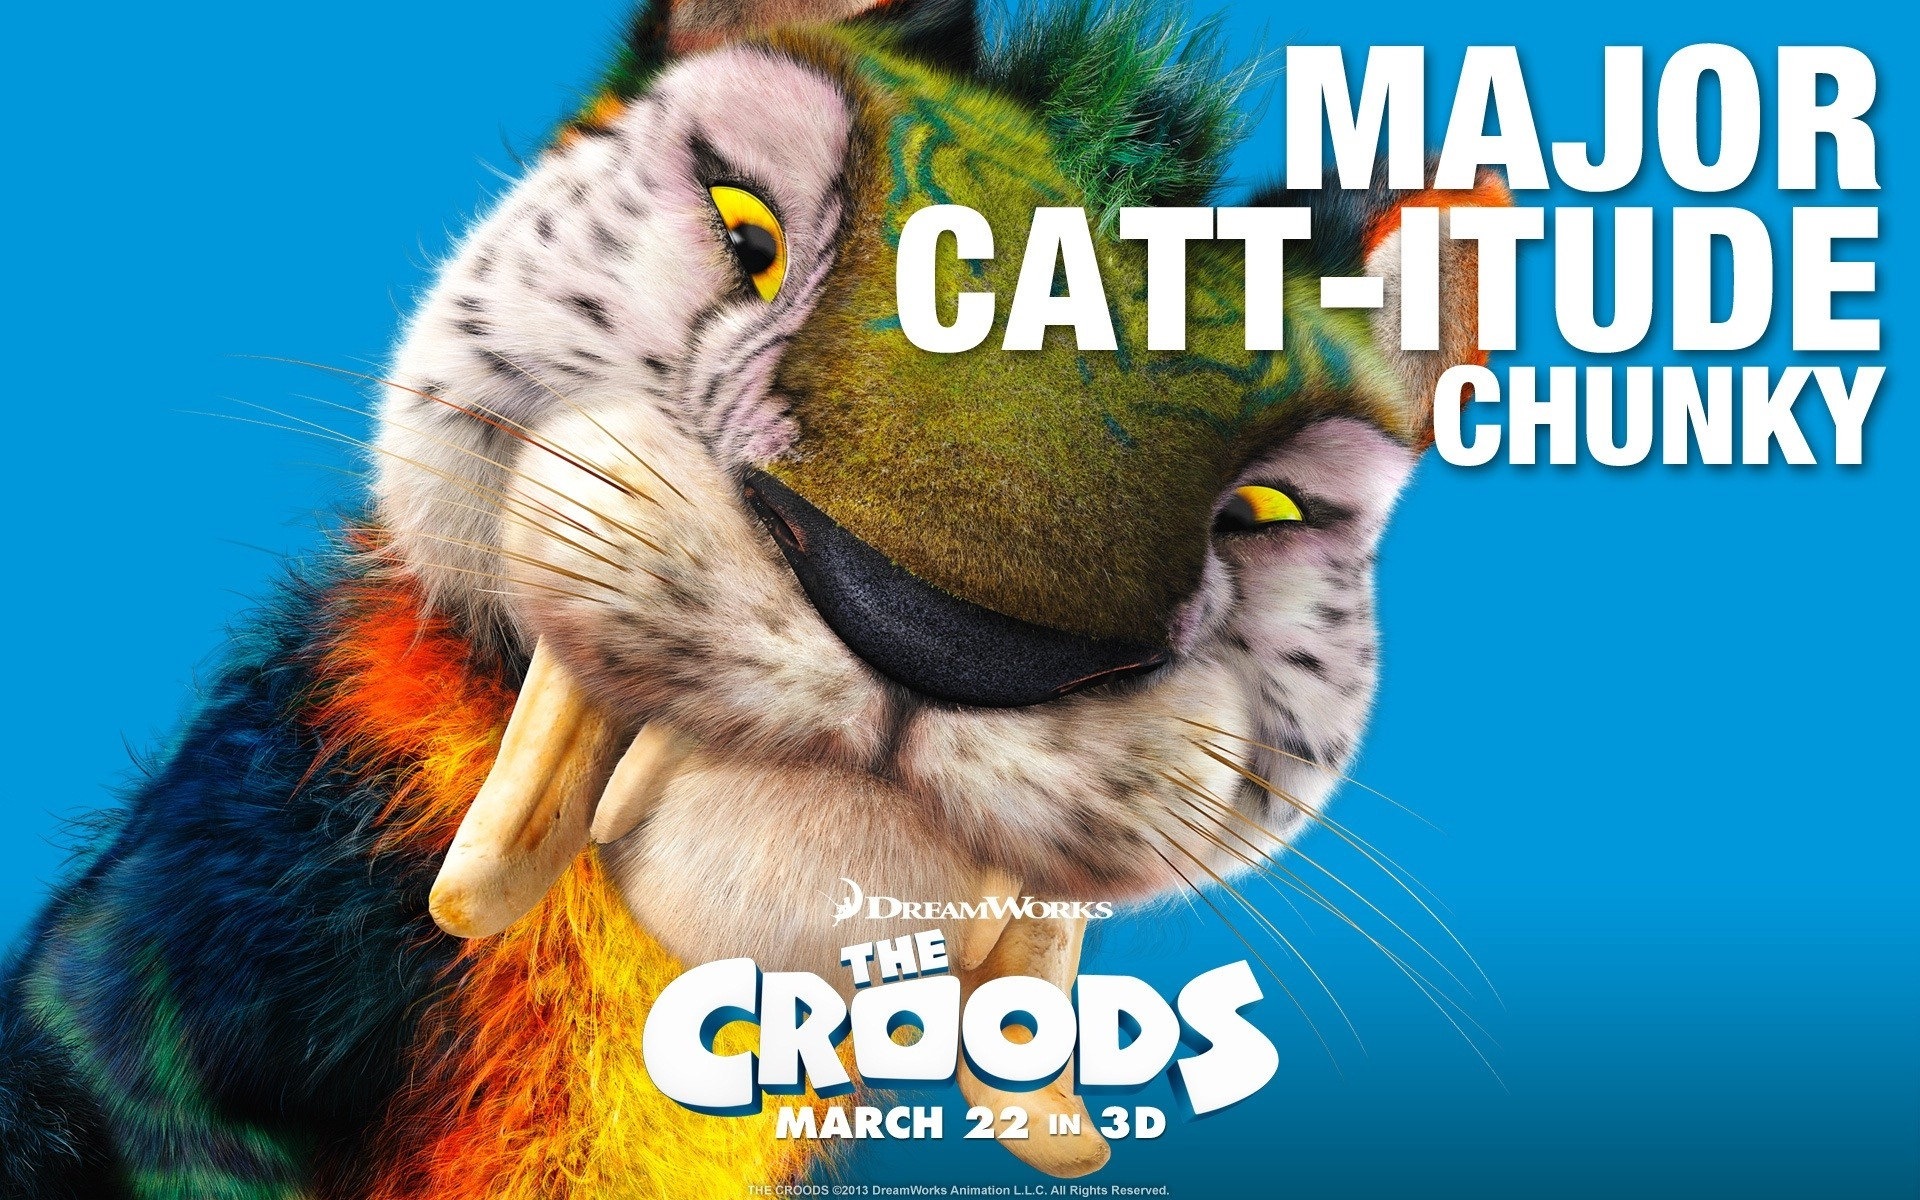 The Croods HD movie wallpapers #12 - 1920x1200